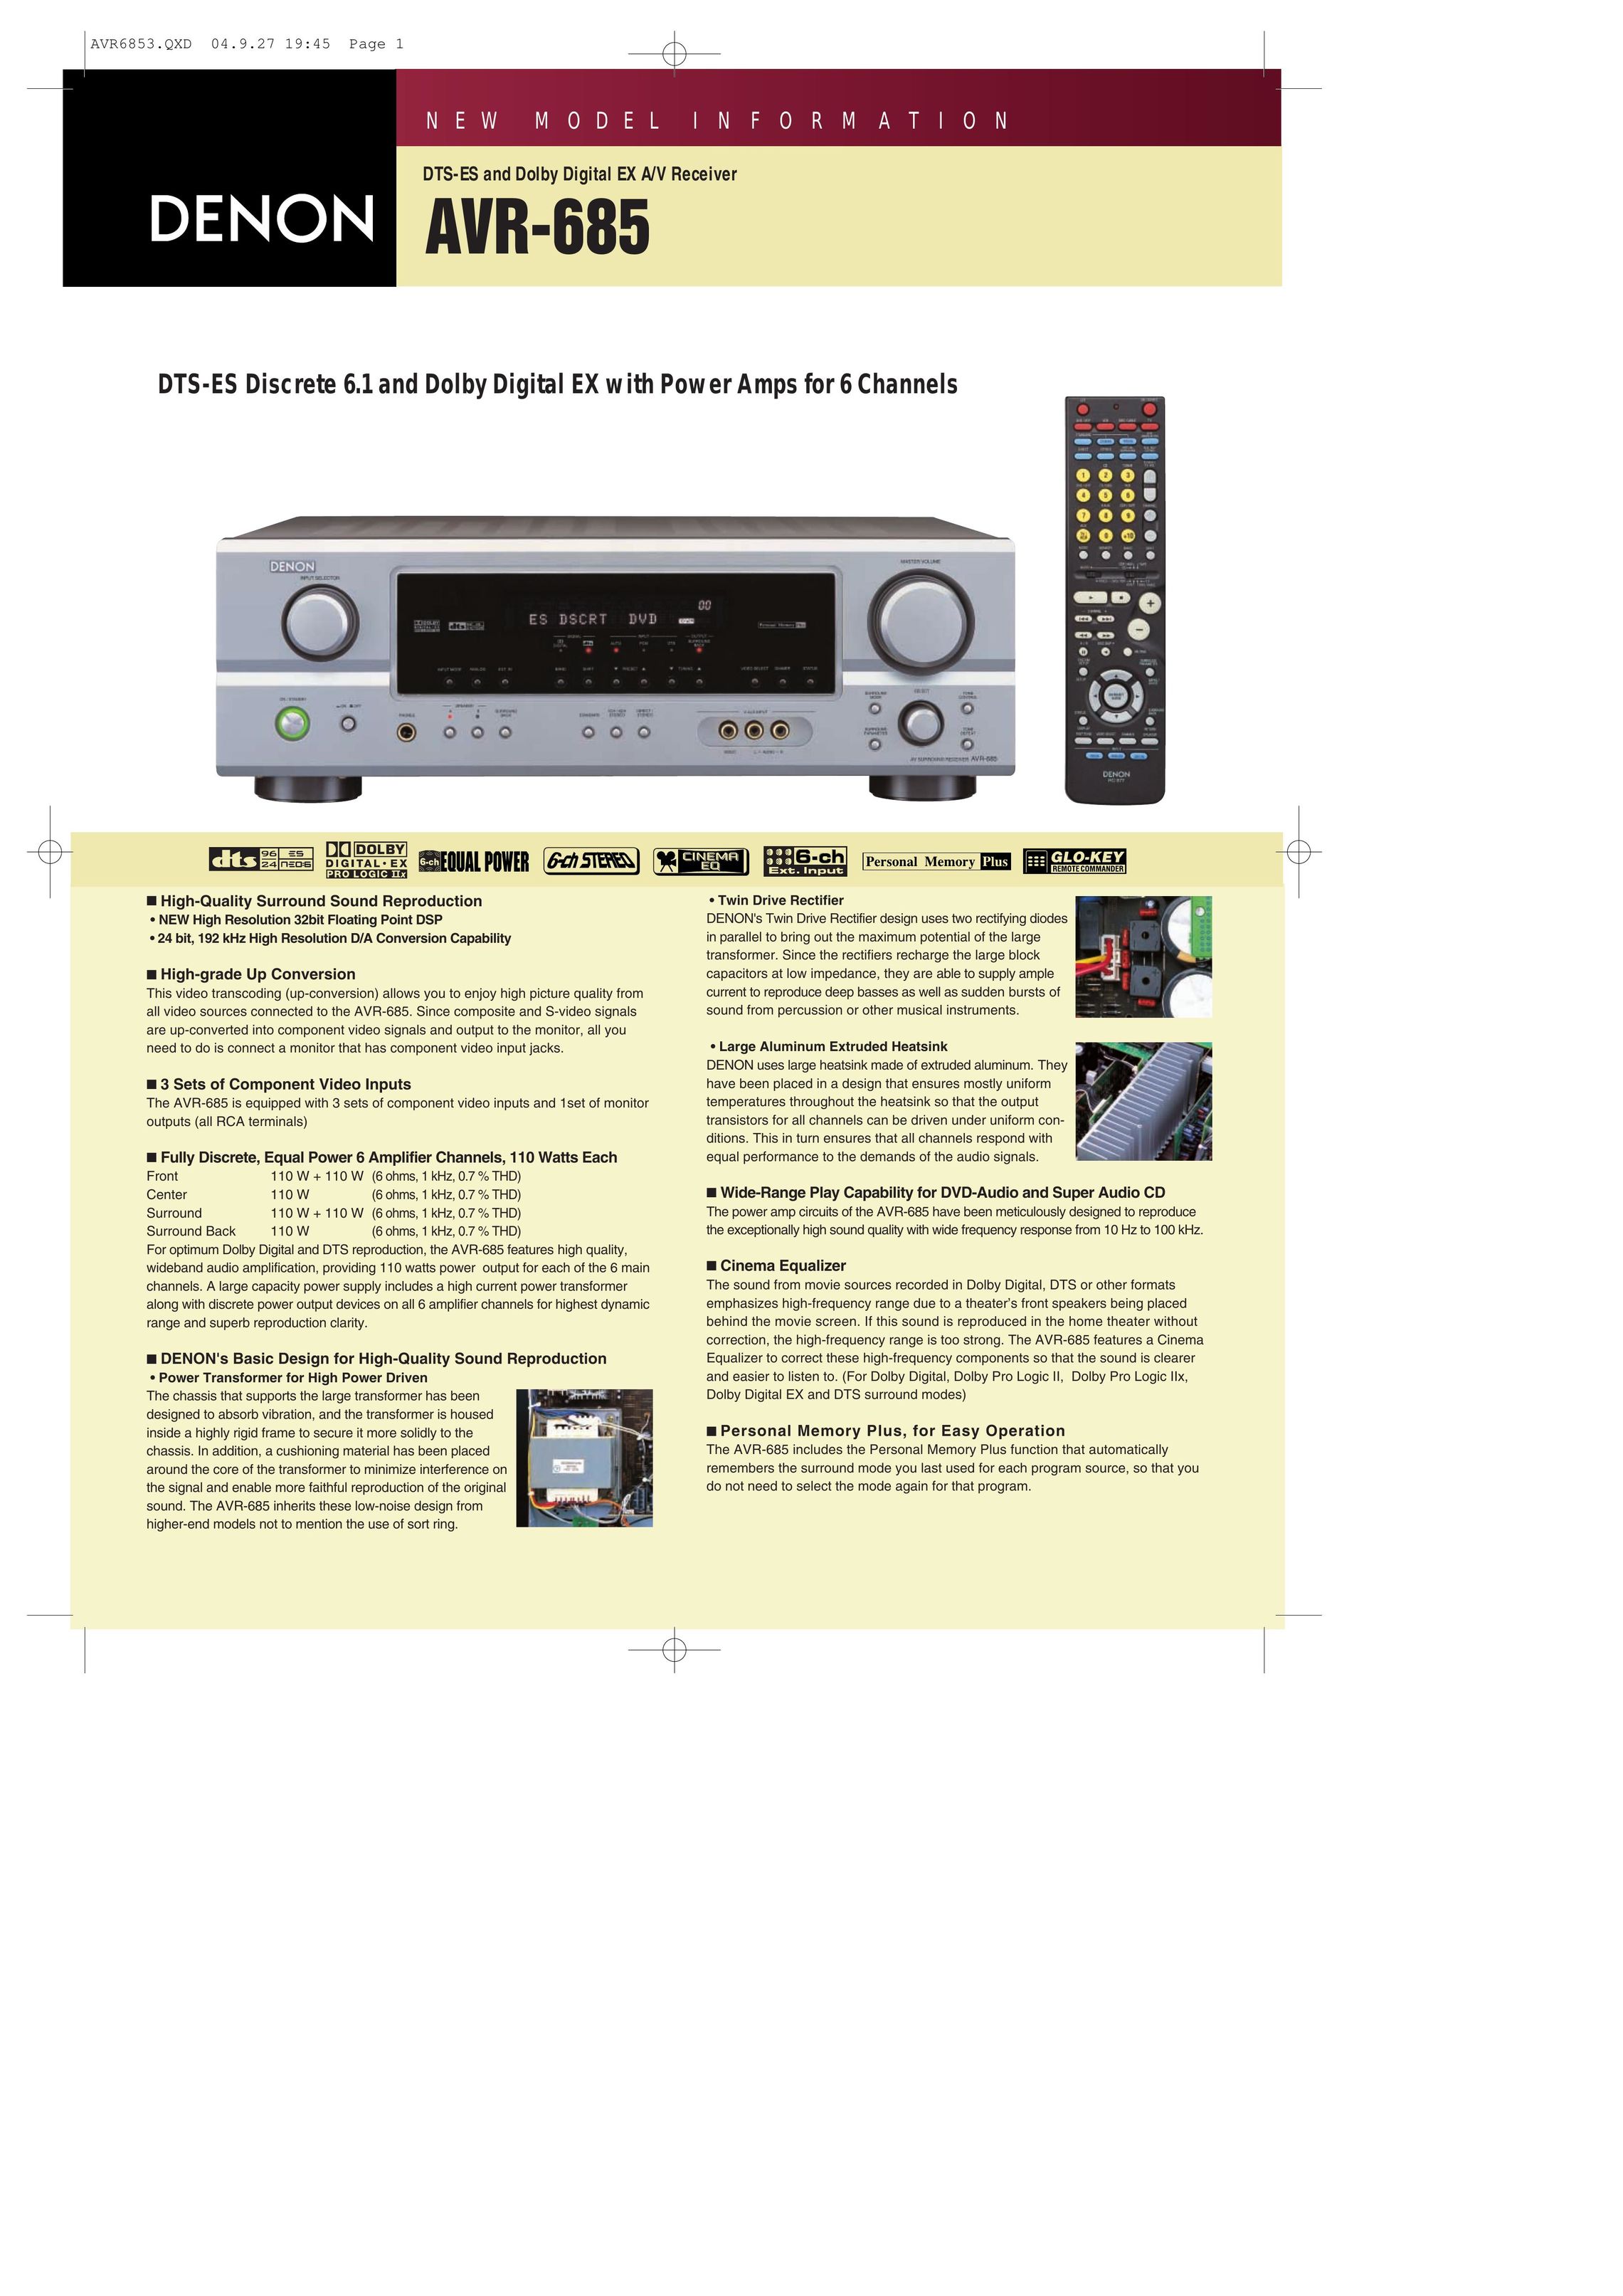 Denon AVR-685 Home Theater System User Manual